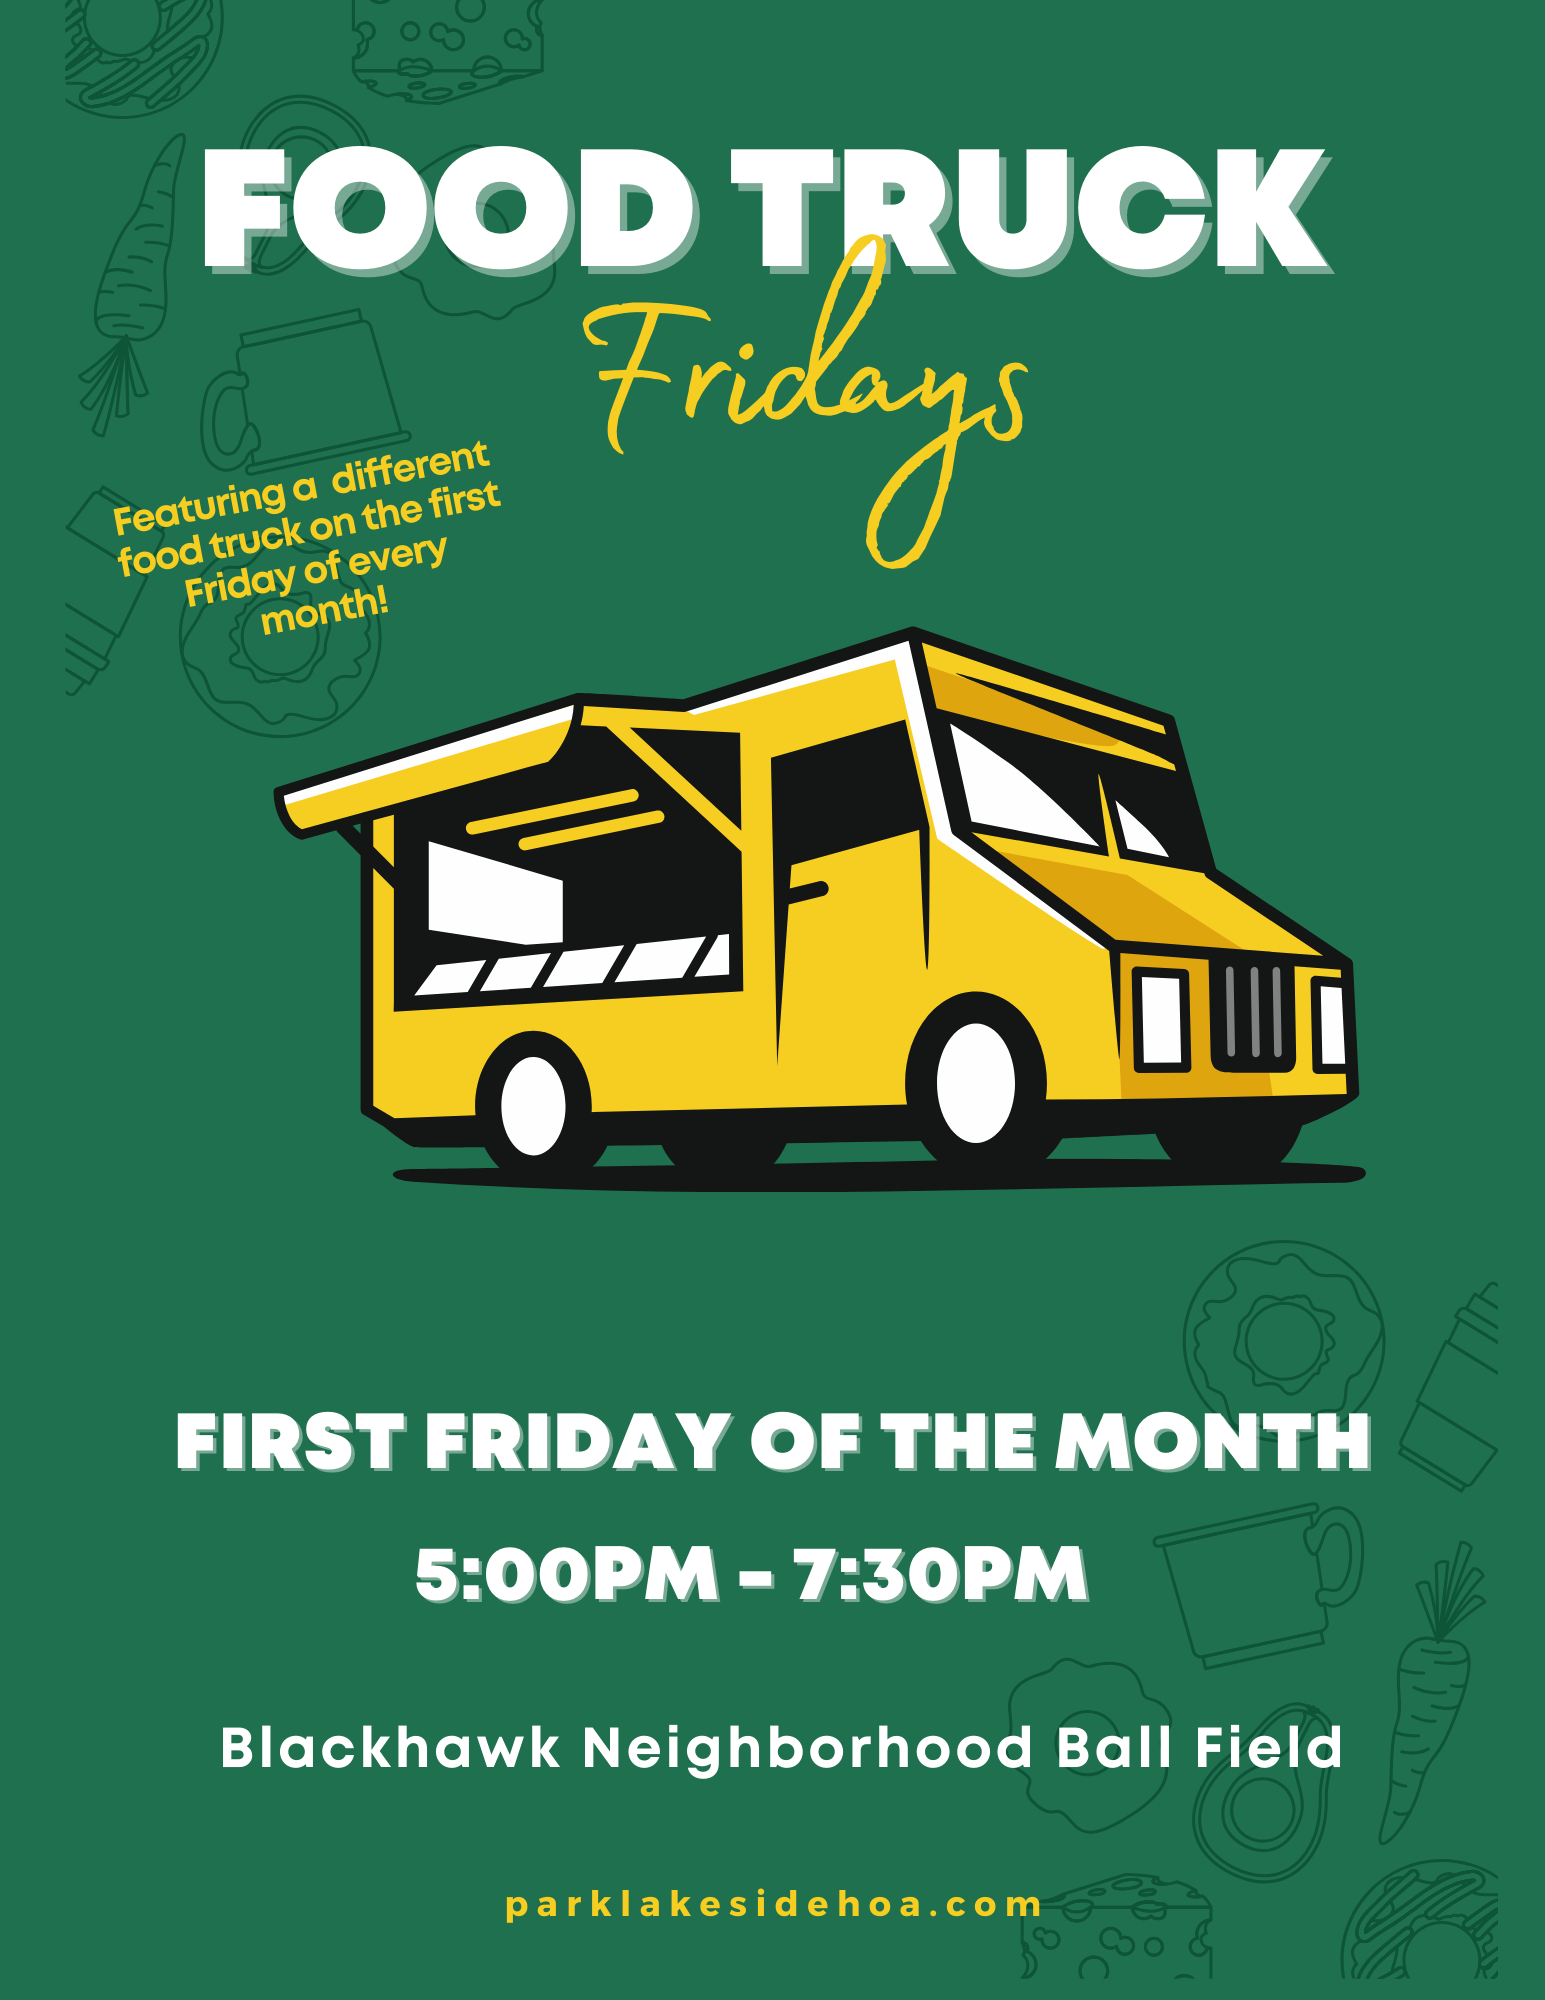 Flyer for Food Truck Fridays event. A large yellow food truck is illustrated on a green background with doodles of food items like carrots, cups, and donuts. Text reads: 'Featuring a different food truck on the first Friday of every month! FIRST FRIDAY OF THE MONTH 5:00PM - 7:30PM at Blackhawk Neighborhood Ball Field. Visit parklakesidehoa.com for more details.